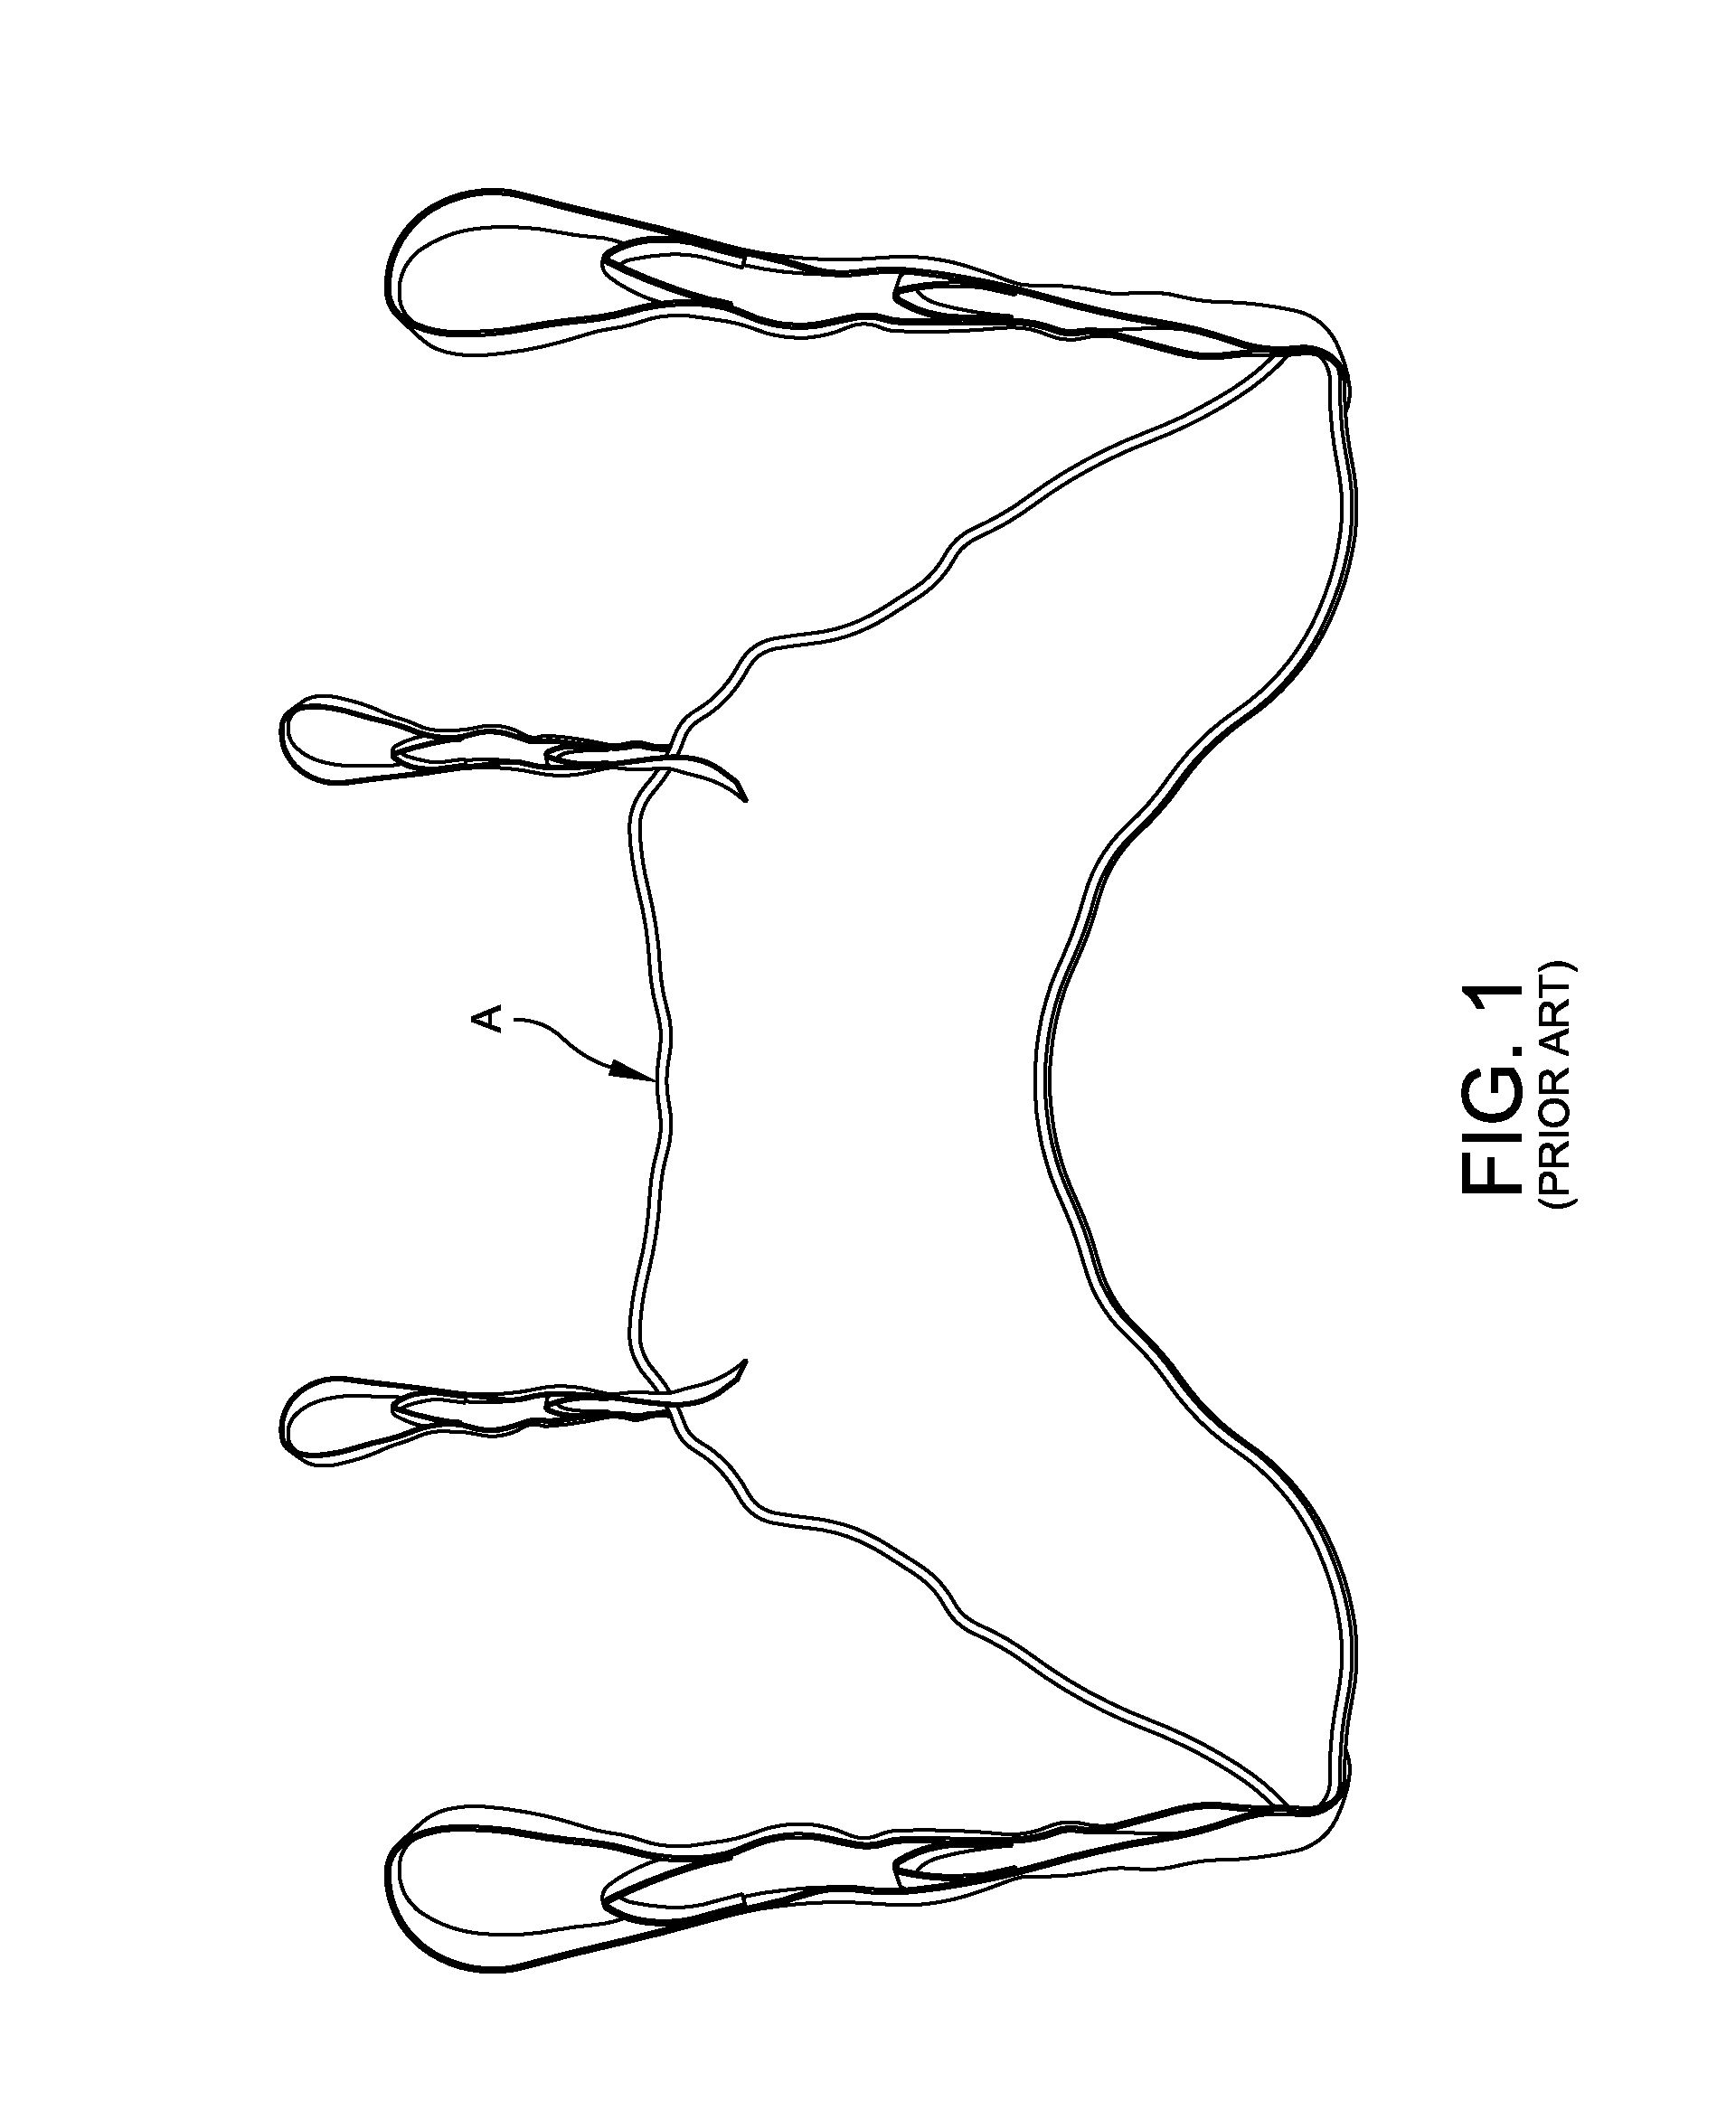 Inflatable sling and method for positioning a patient